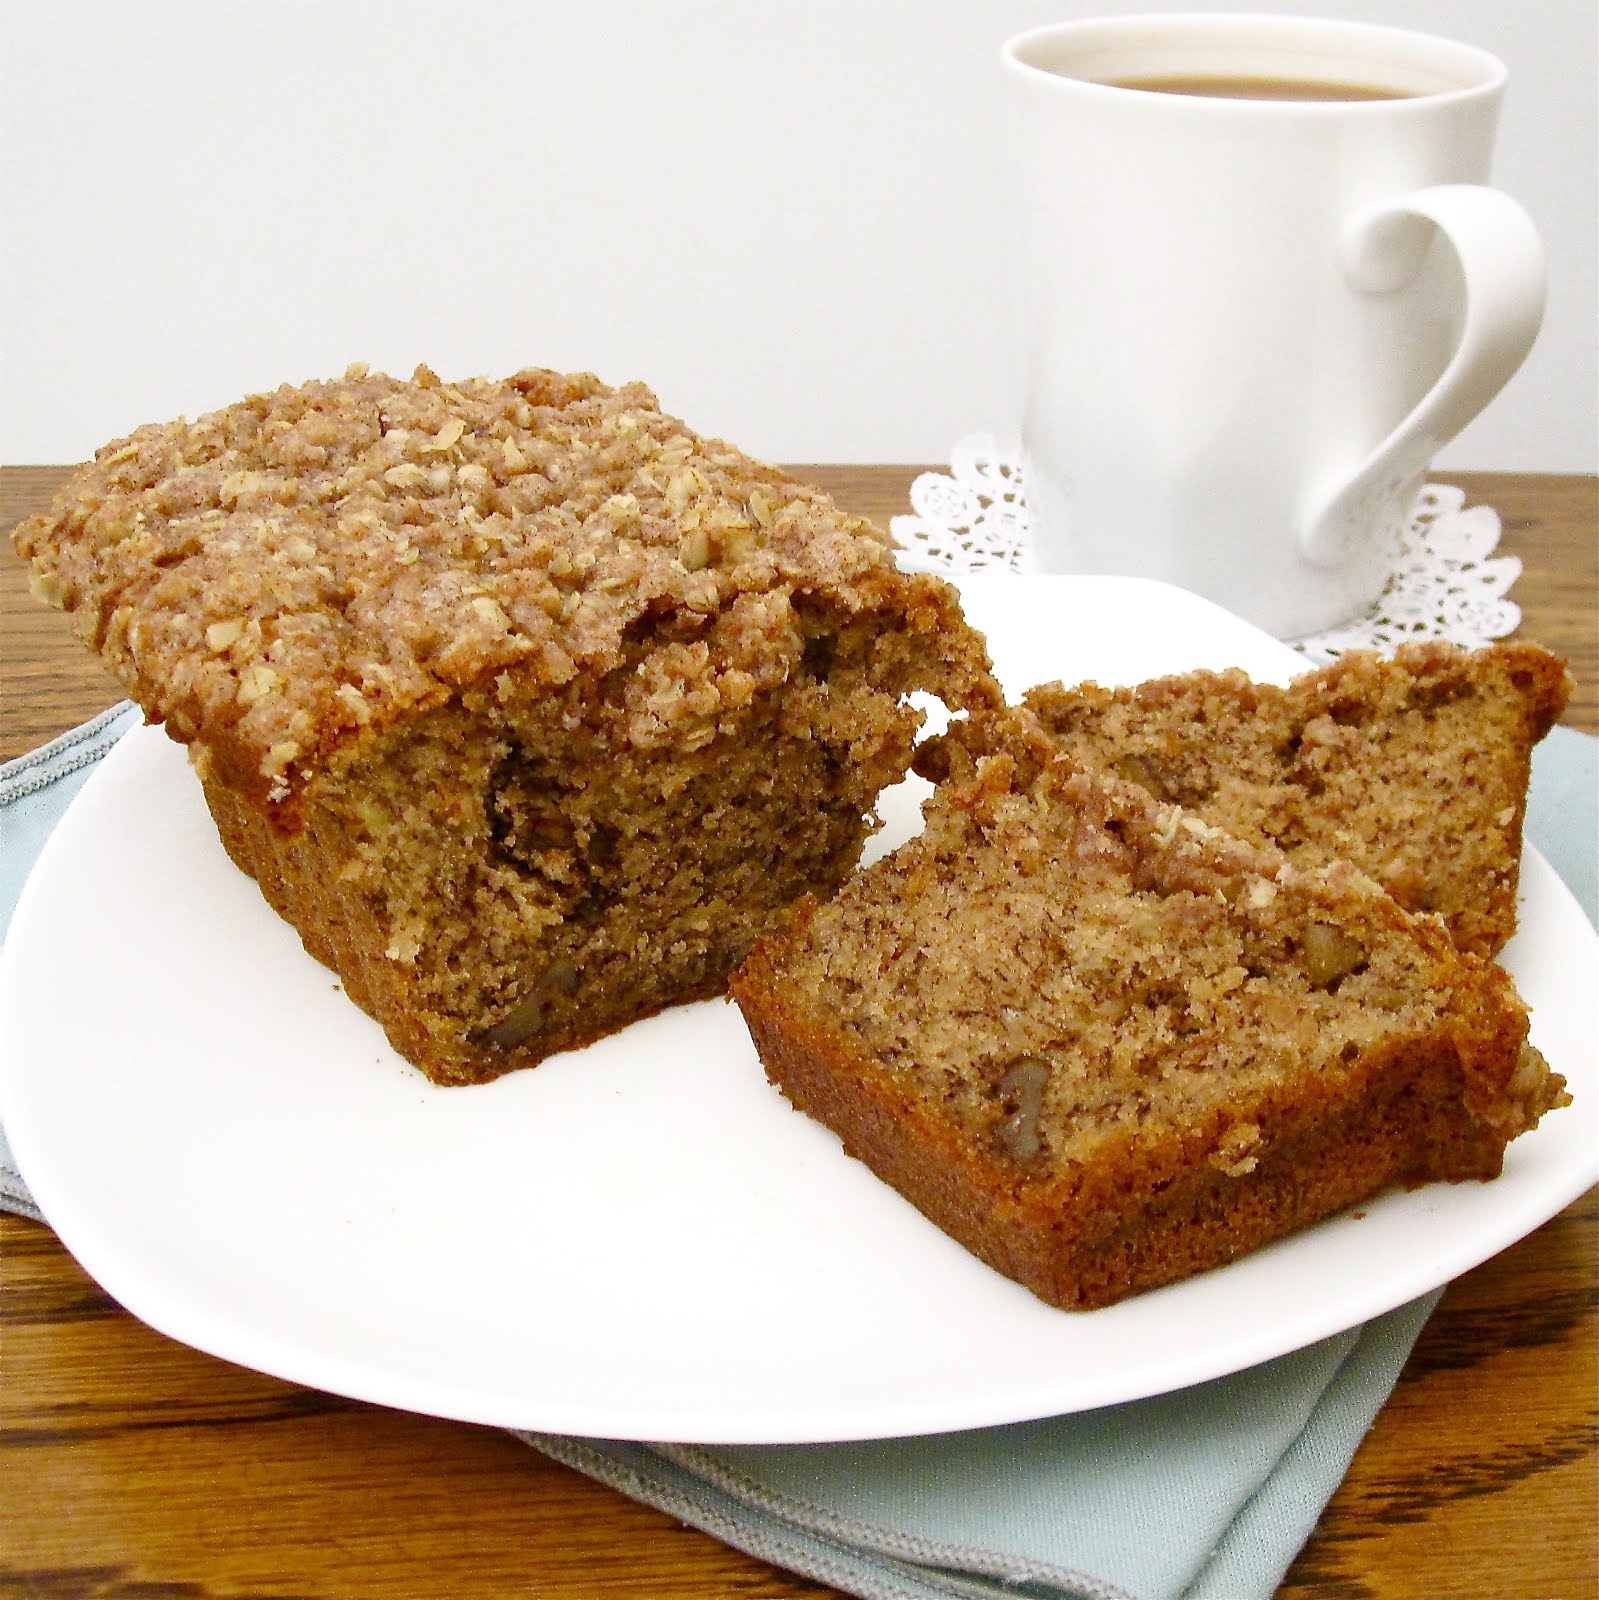 Banana Nut Bread with Oat Streusel Topping - The Lindsay Ann